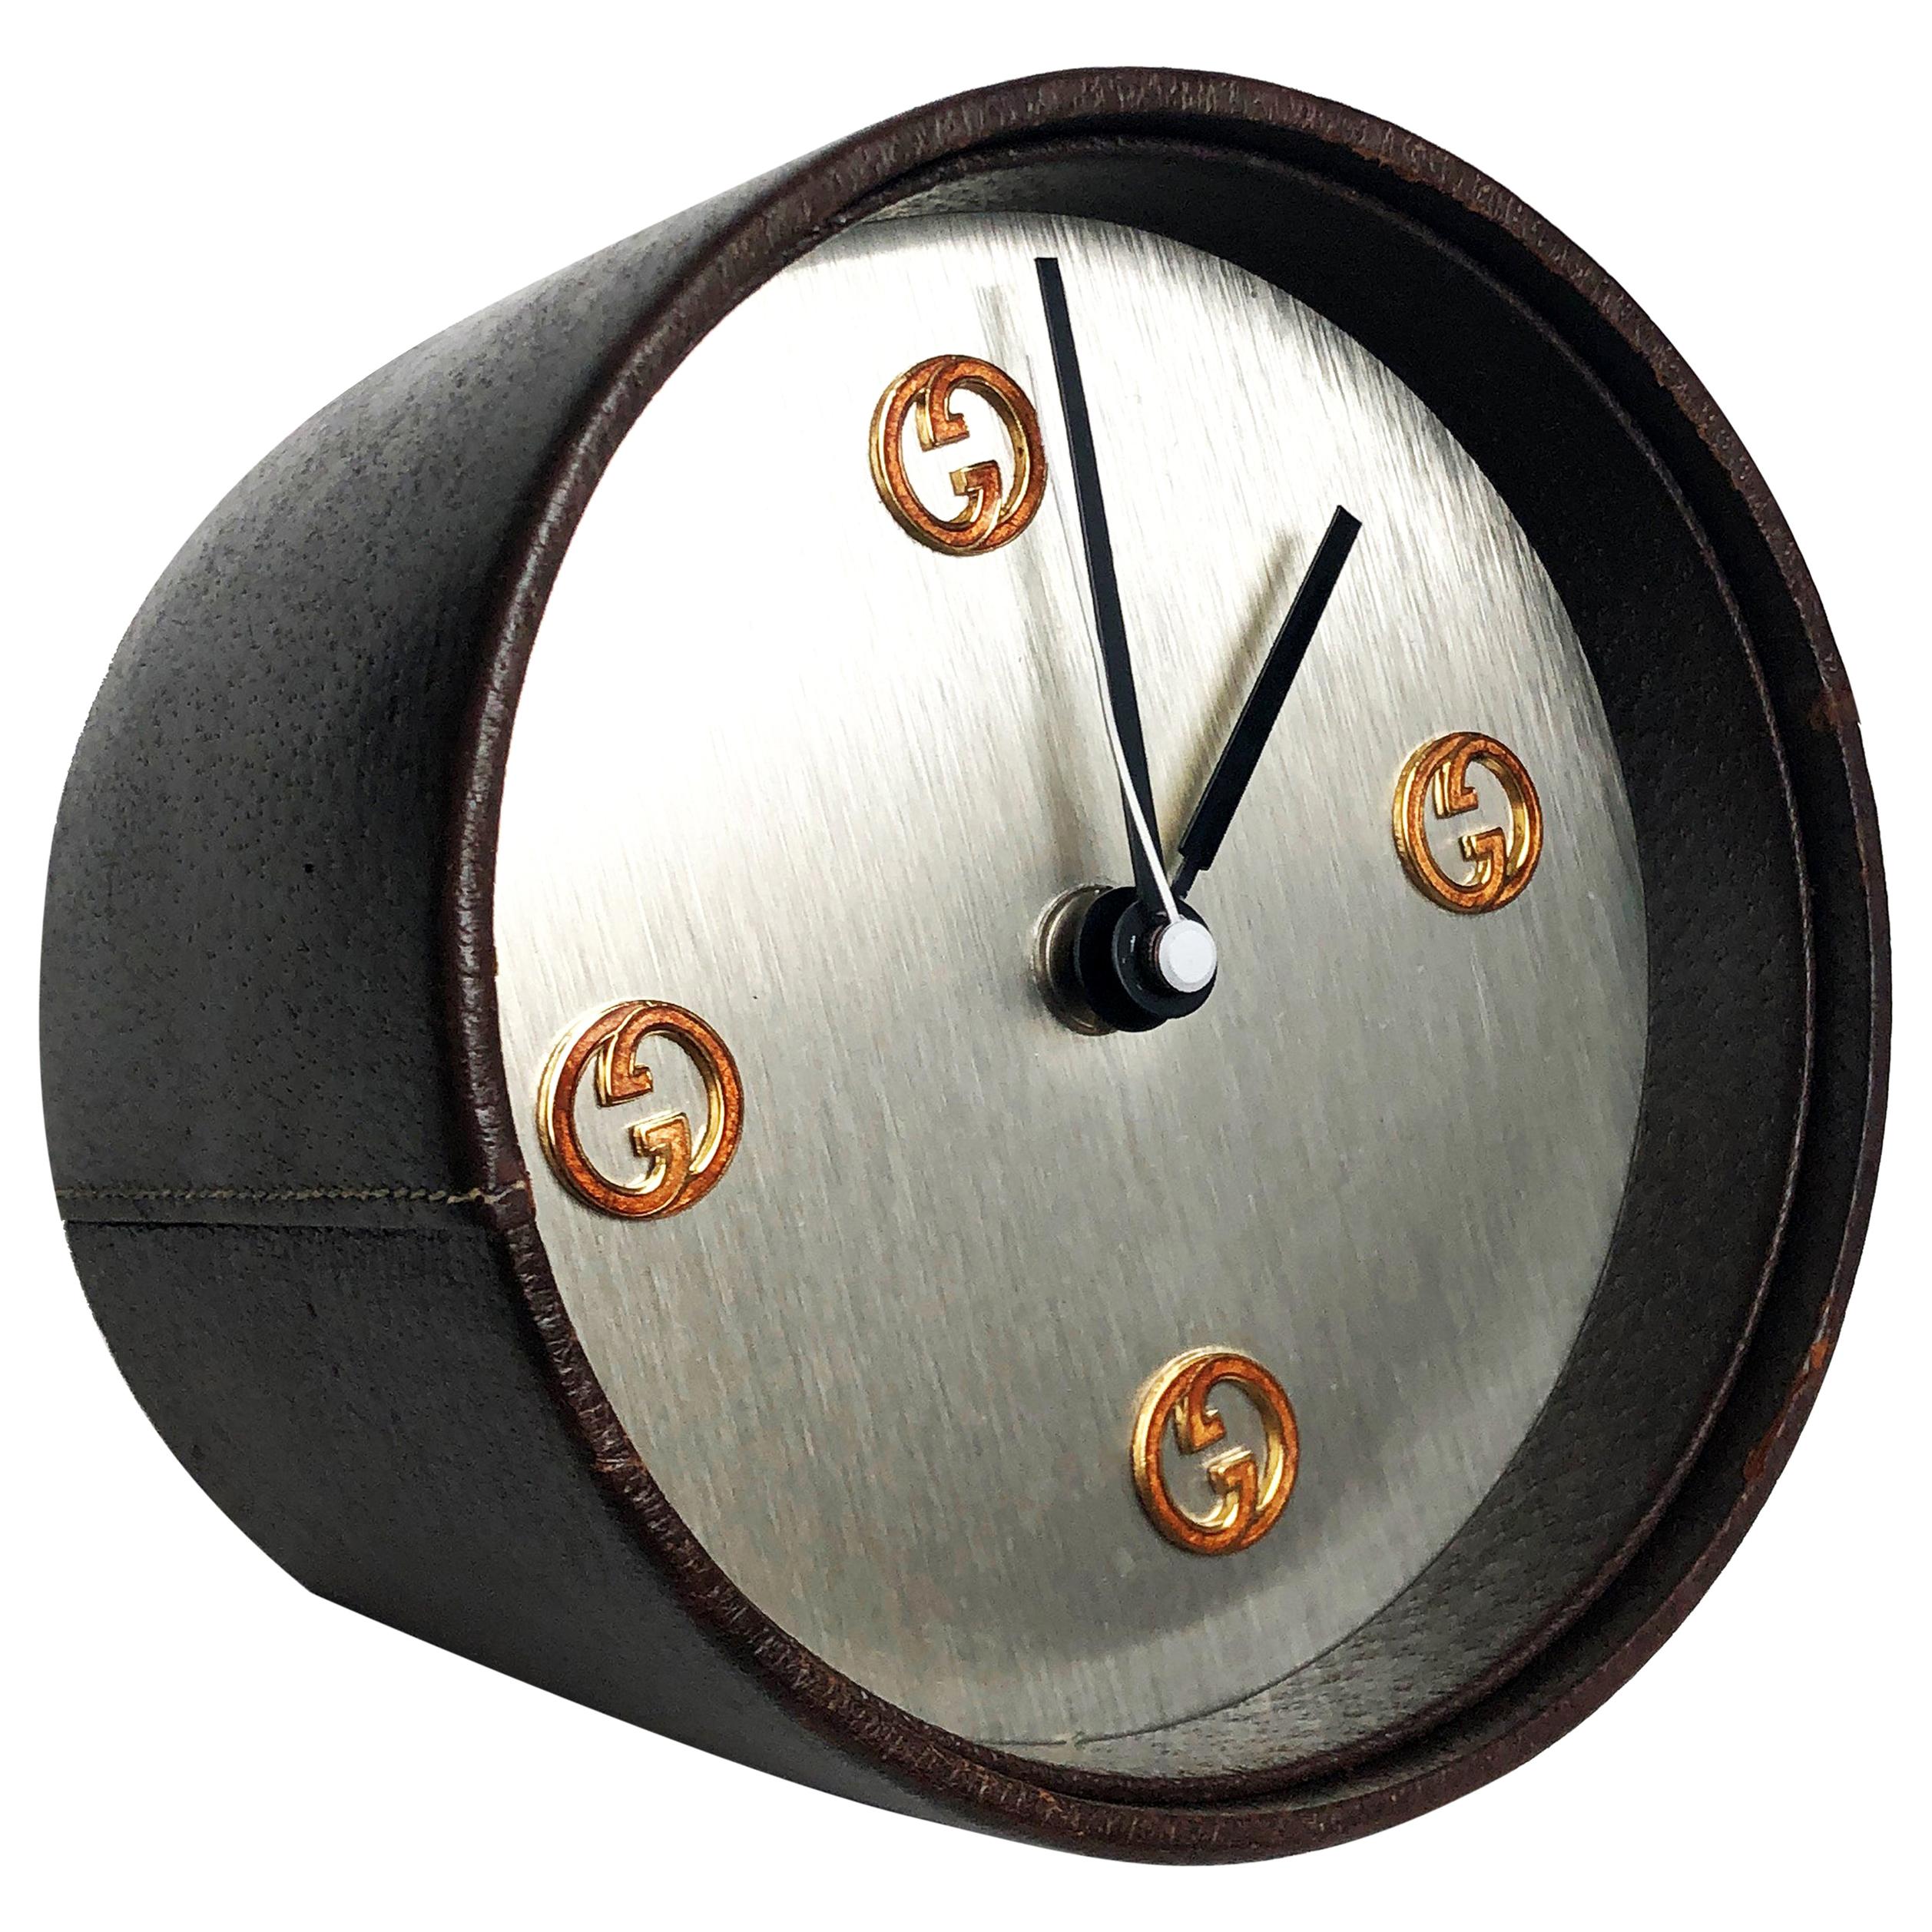 Authentic, preowned, vintage Gucci desk clock, circa the early 1980s. Covered in pigskin leather, with GG logo motif hour markings. With it's modern styling, it's perfect for the home office, den or bar.

This clock originally came with a battery